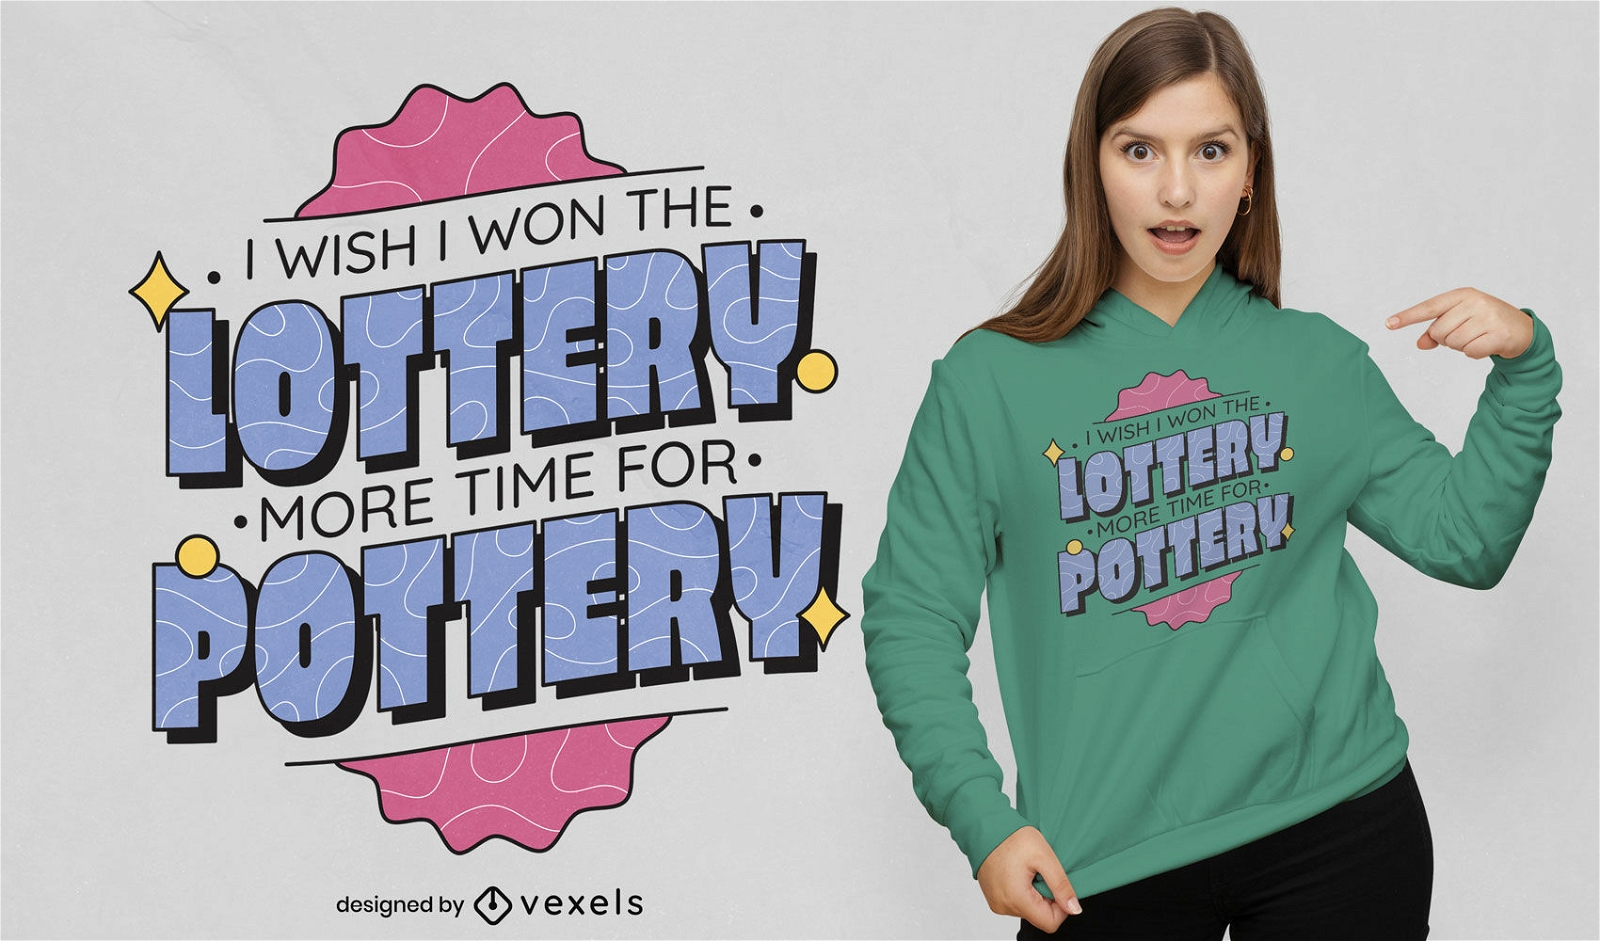 Pottery hobby quote t-shirt design